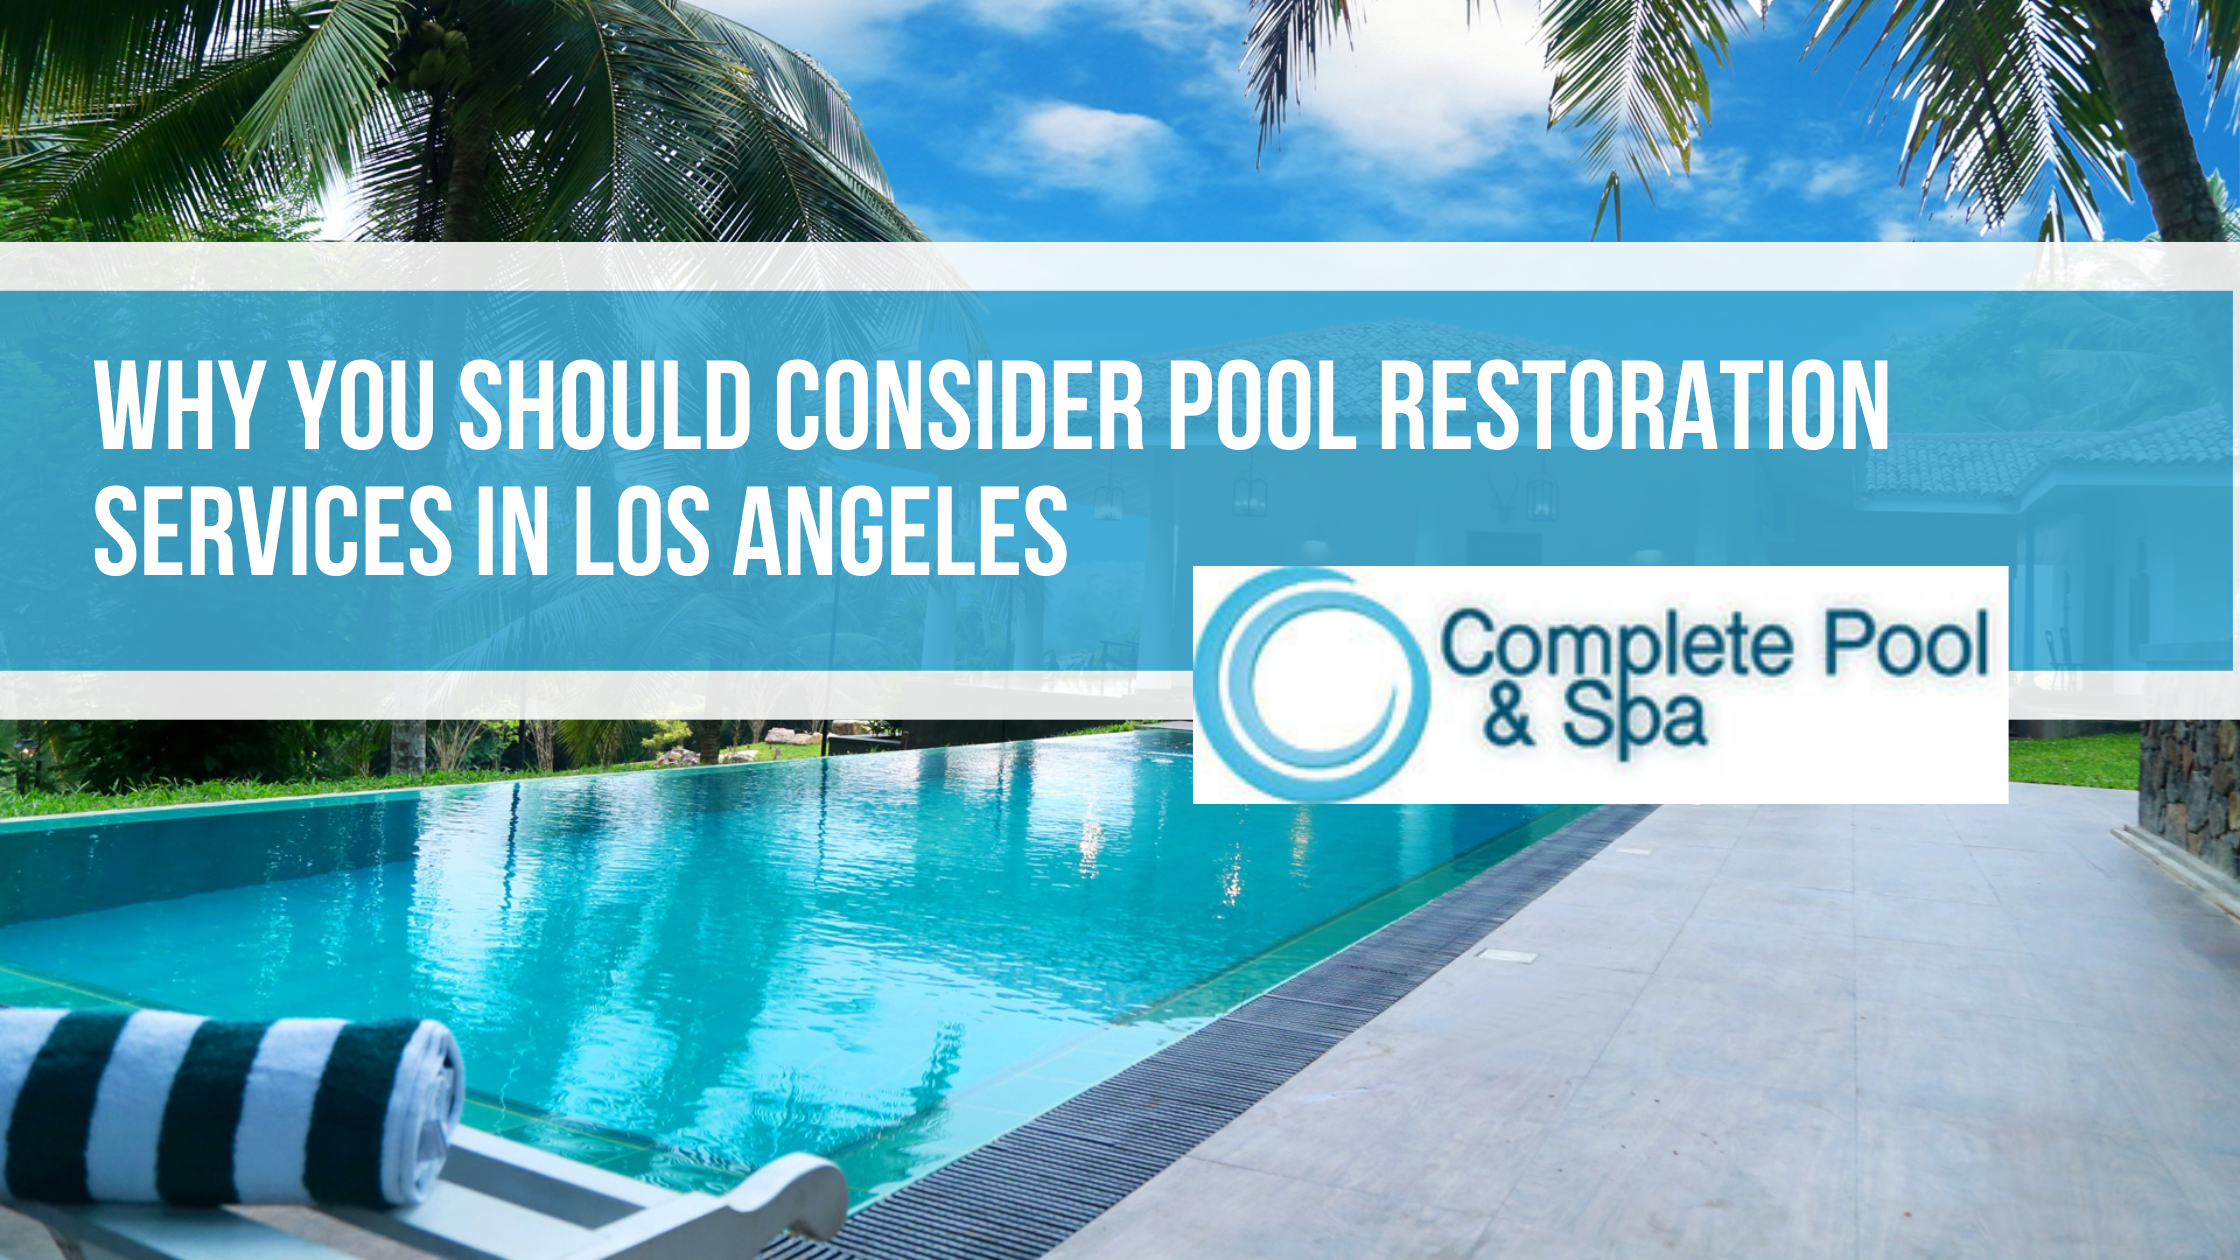 f you are in need of pool restoration services in Los Angeles, be sure to call a reputable pool restoration company.